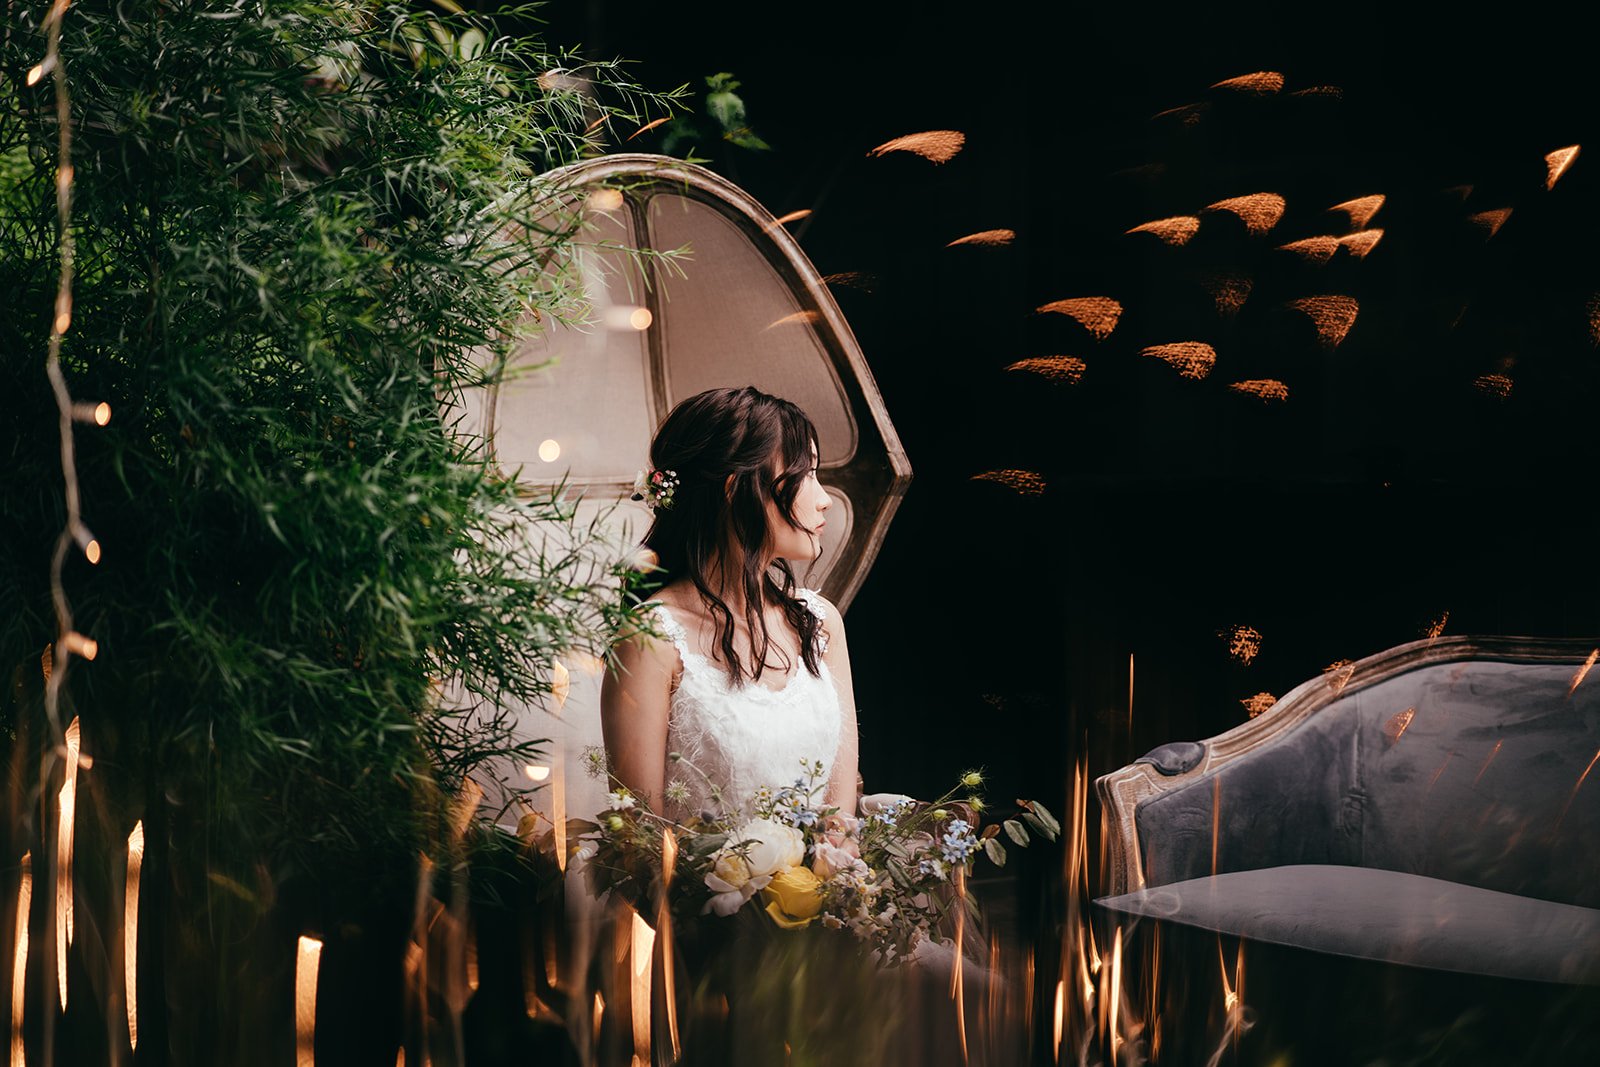 glasshouse-morningside-top-auckland-wedding-phtographer-photography-videography-film-new-zealand-NZ-best-urban-venue-stylish-intimate-central-ceremony-reception-dear-white-productions (35).jpg